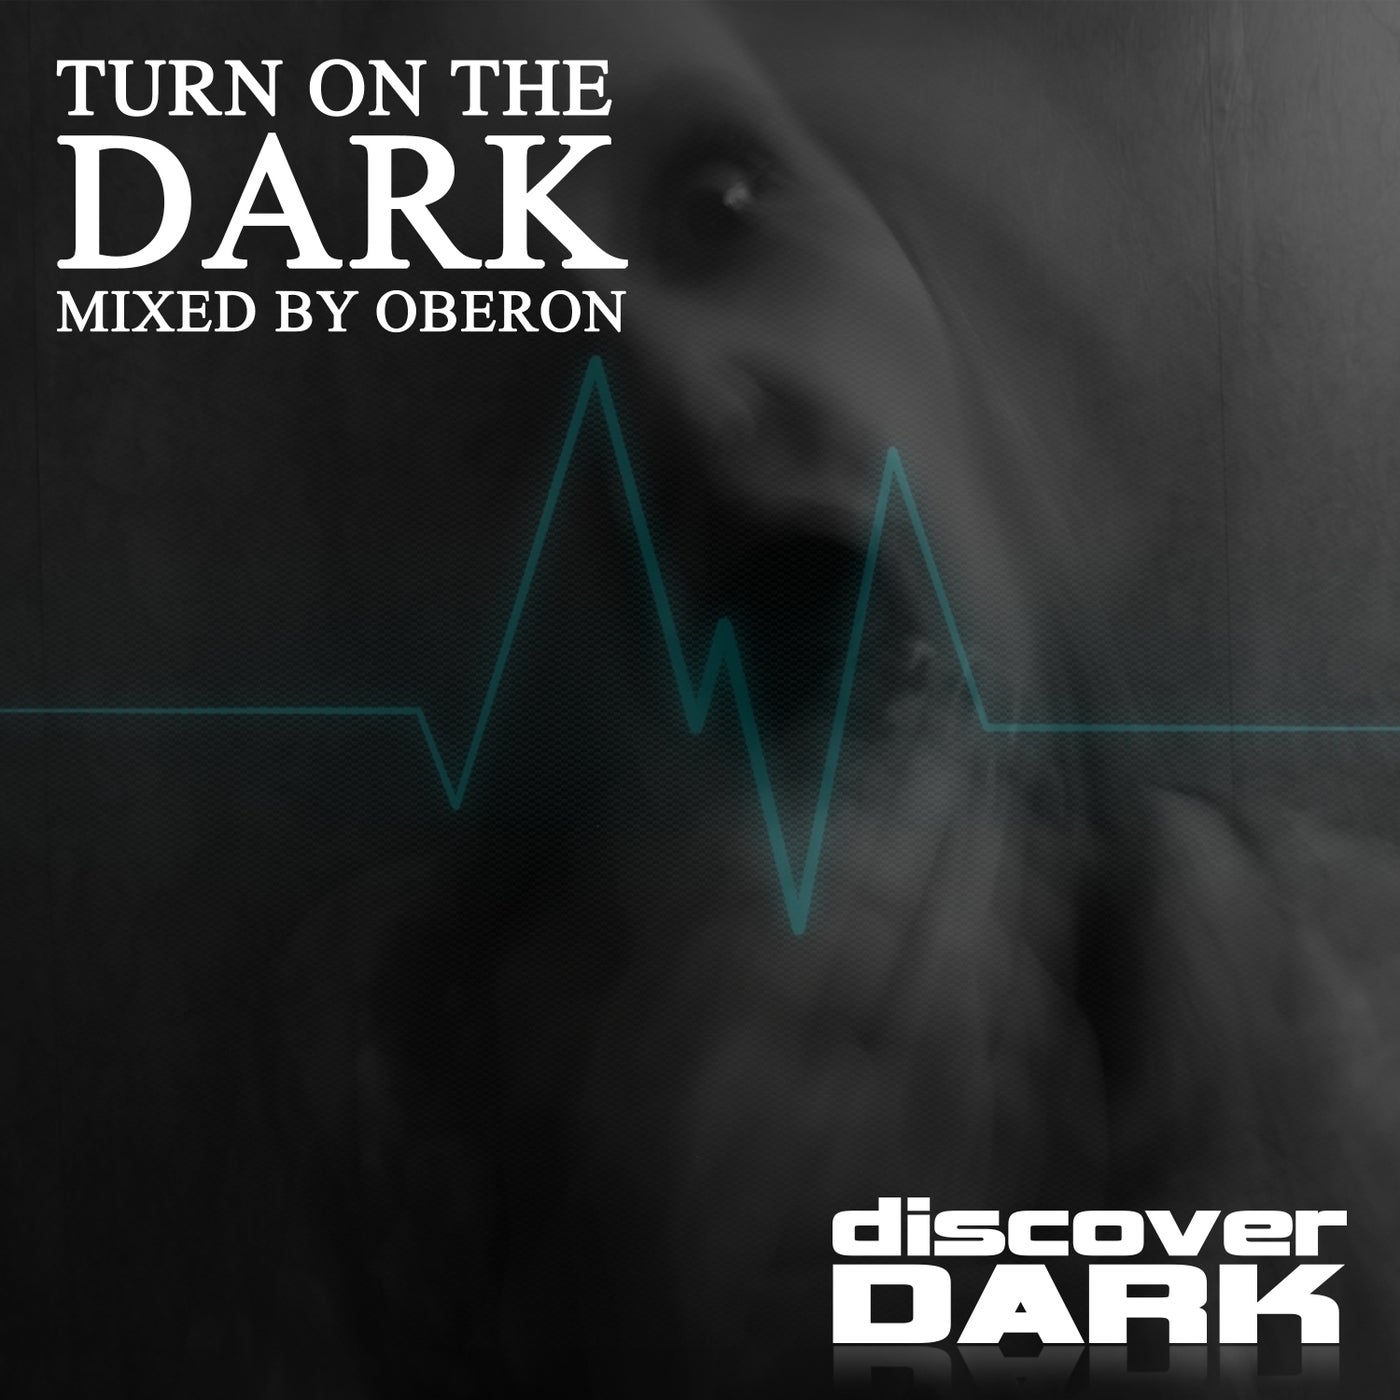 Turn on the Dark (Mixed by Oberon)